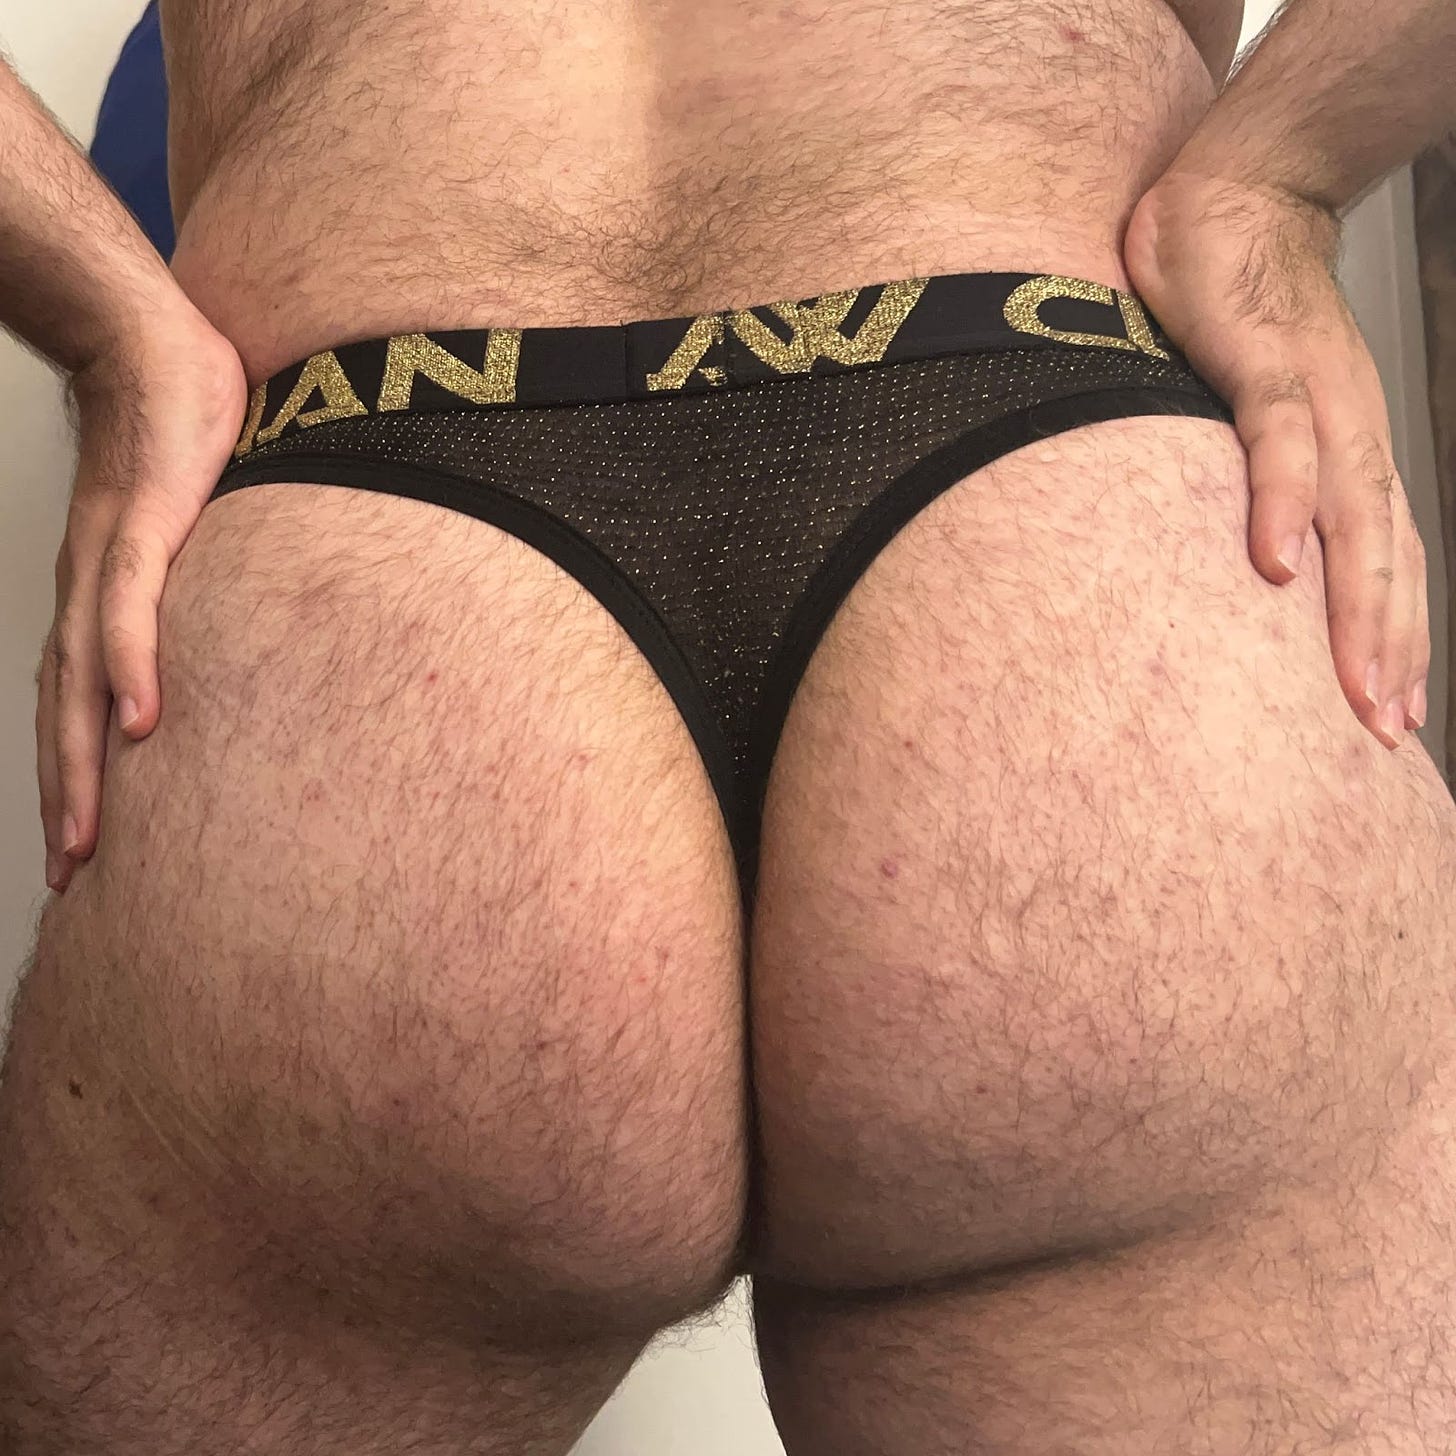 Two furry, spherical ass cheeks separated by the fabric of a gold-shimmer Andrew Christian thong worn by the author.